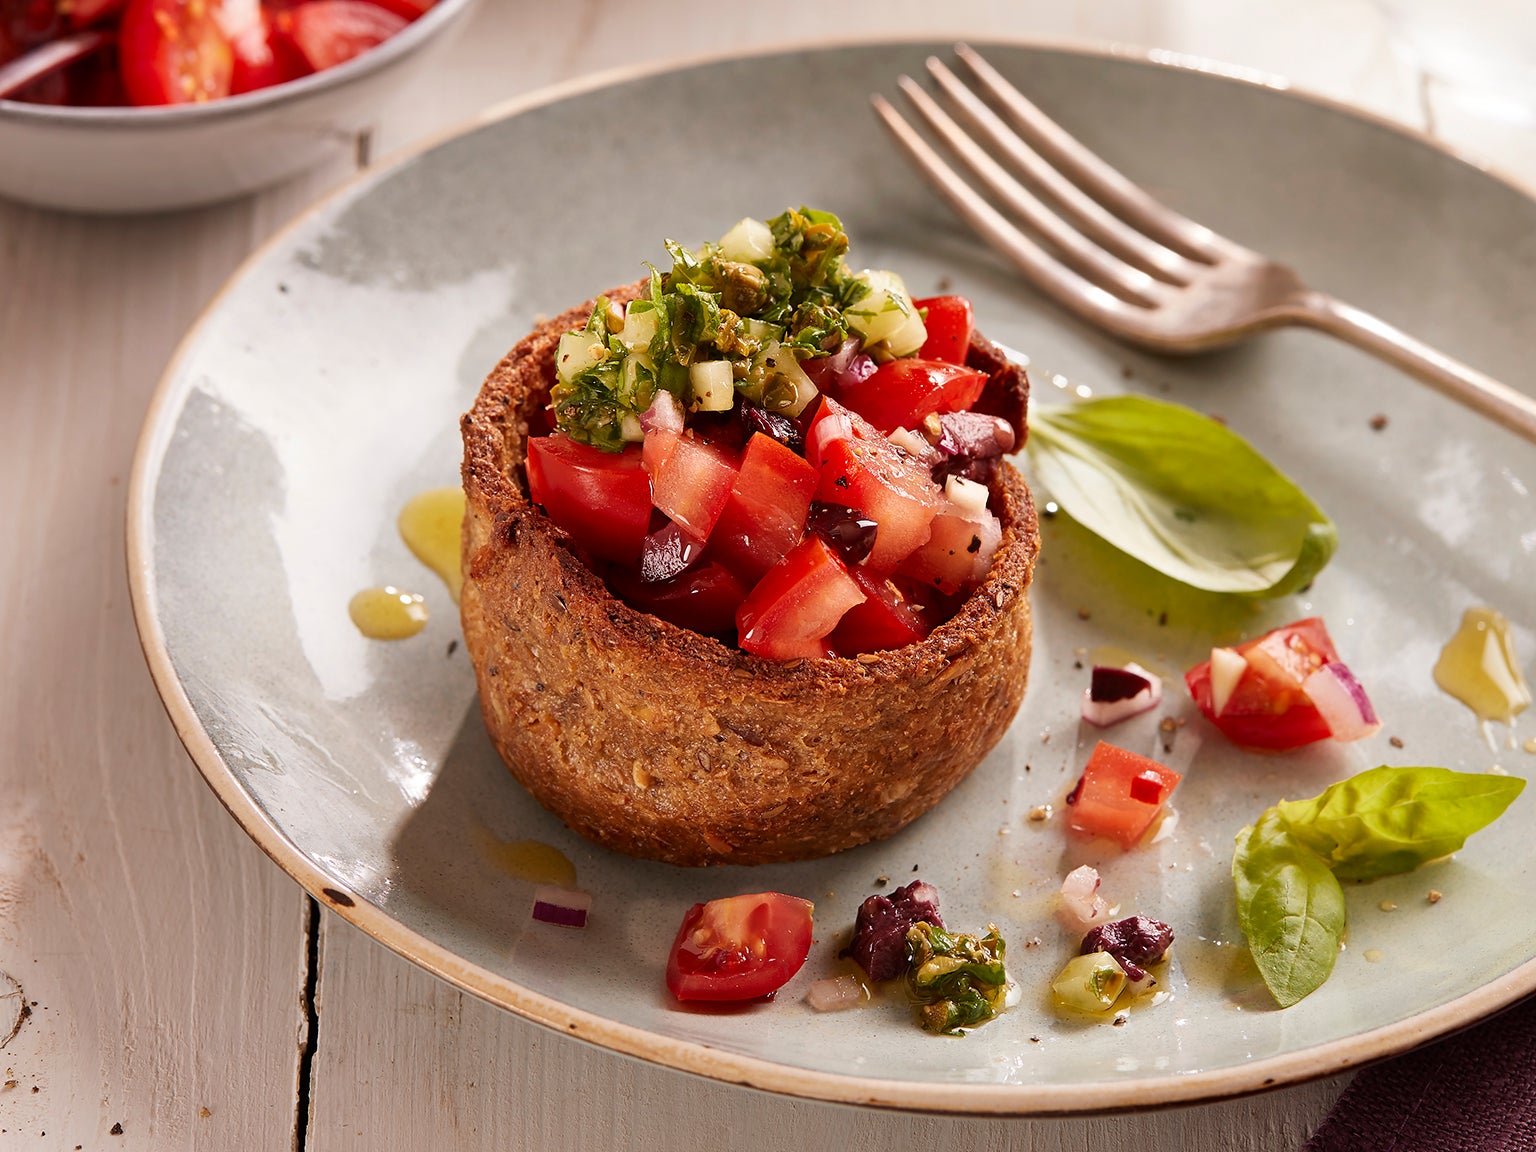 These ‘summer in a bowl’ panzanella tarts are fresh and light, but still filling, and can easily be adapted